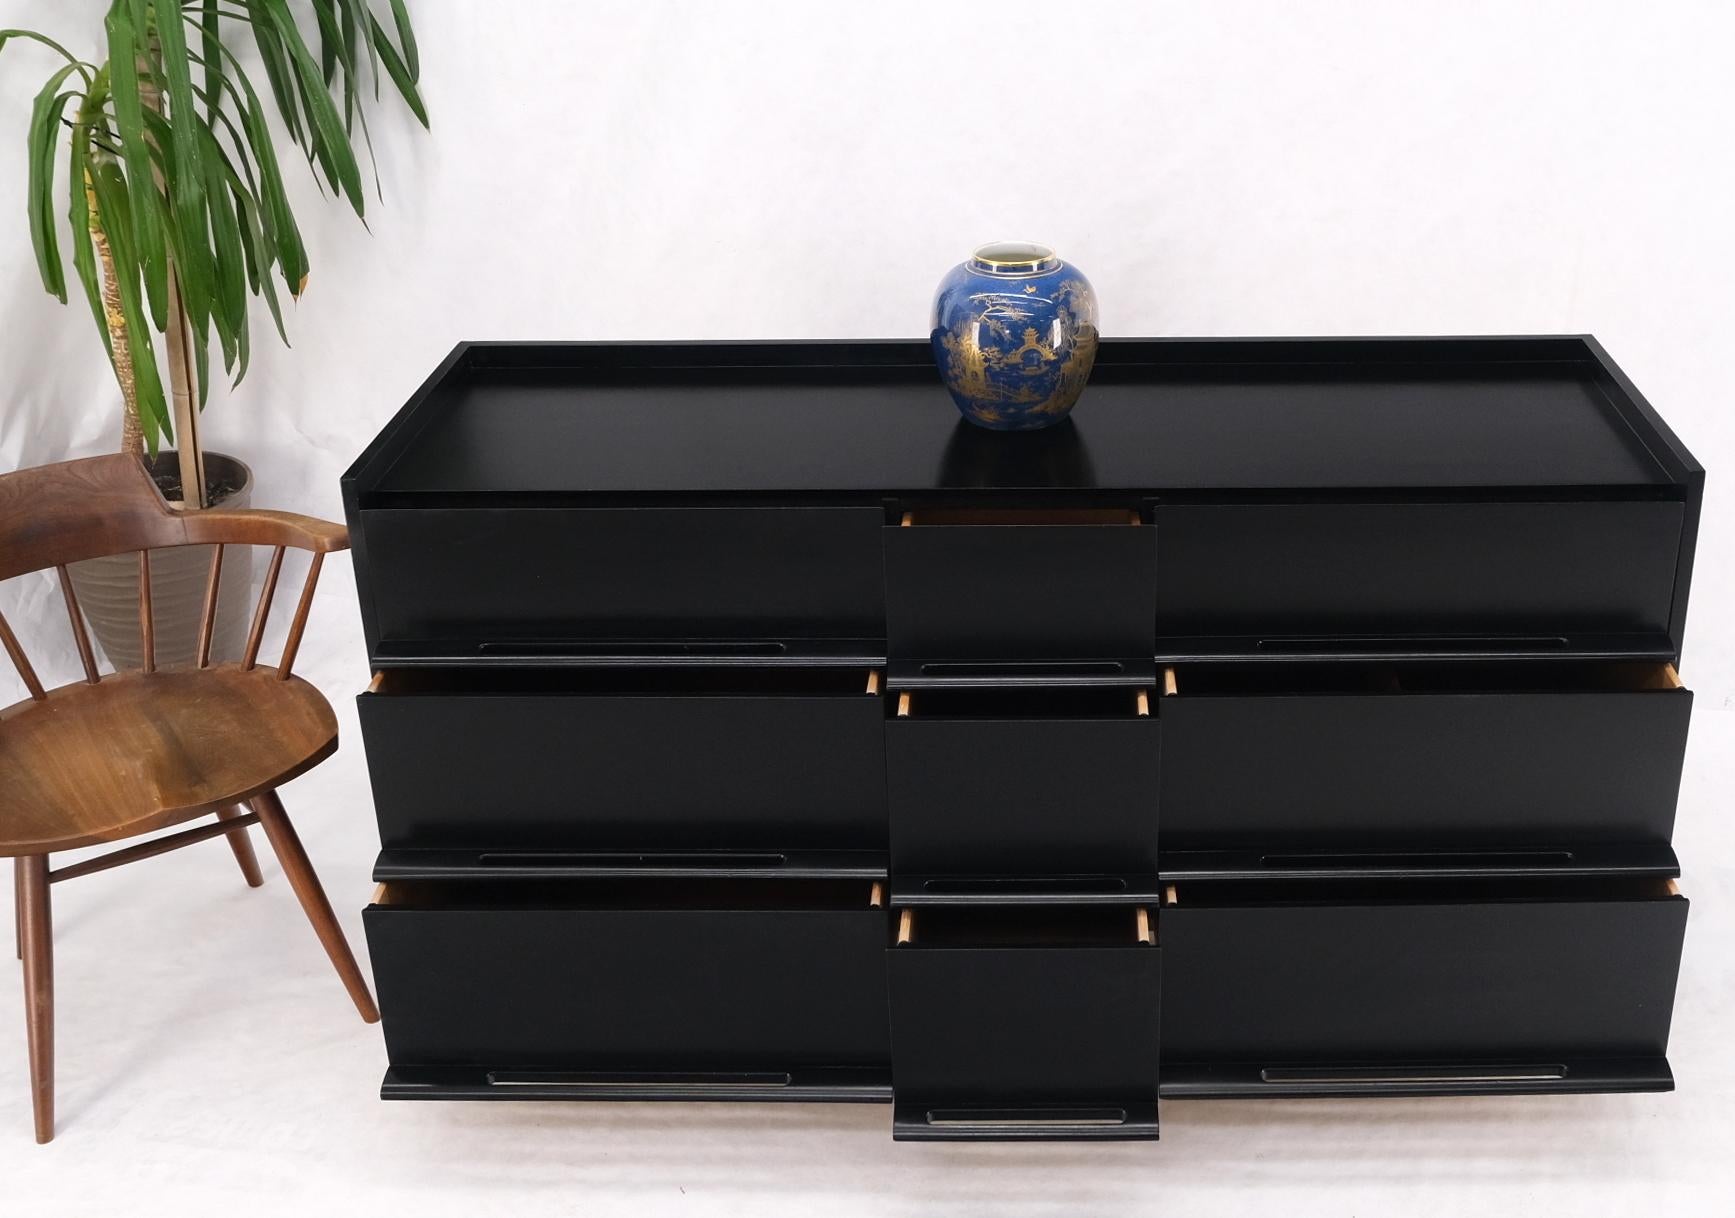 20th Century Black Lacquer Ebonized Pieced Wood Pulls Gallery Top 9 Drawers Dresser Credenza For Sale